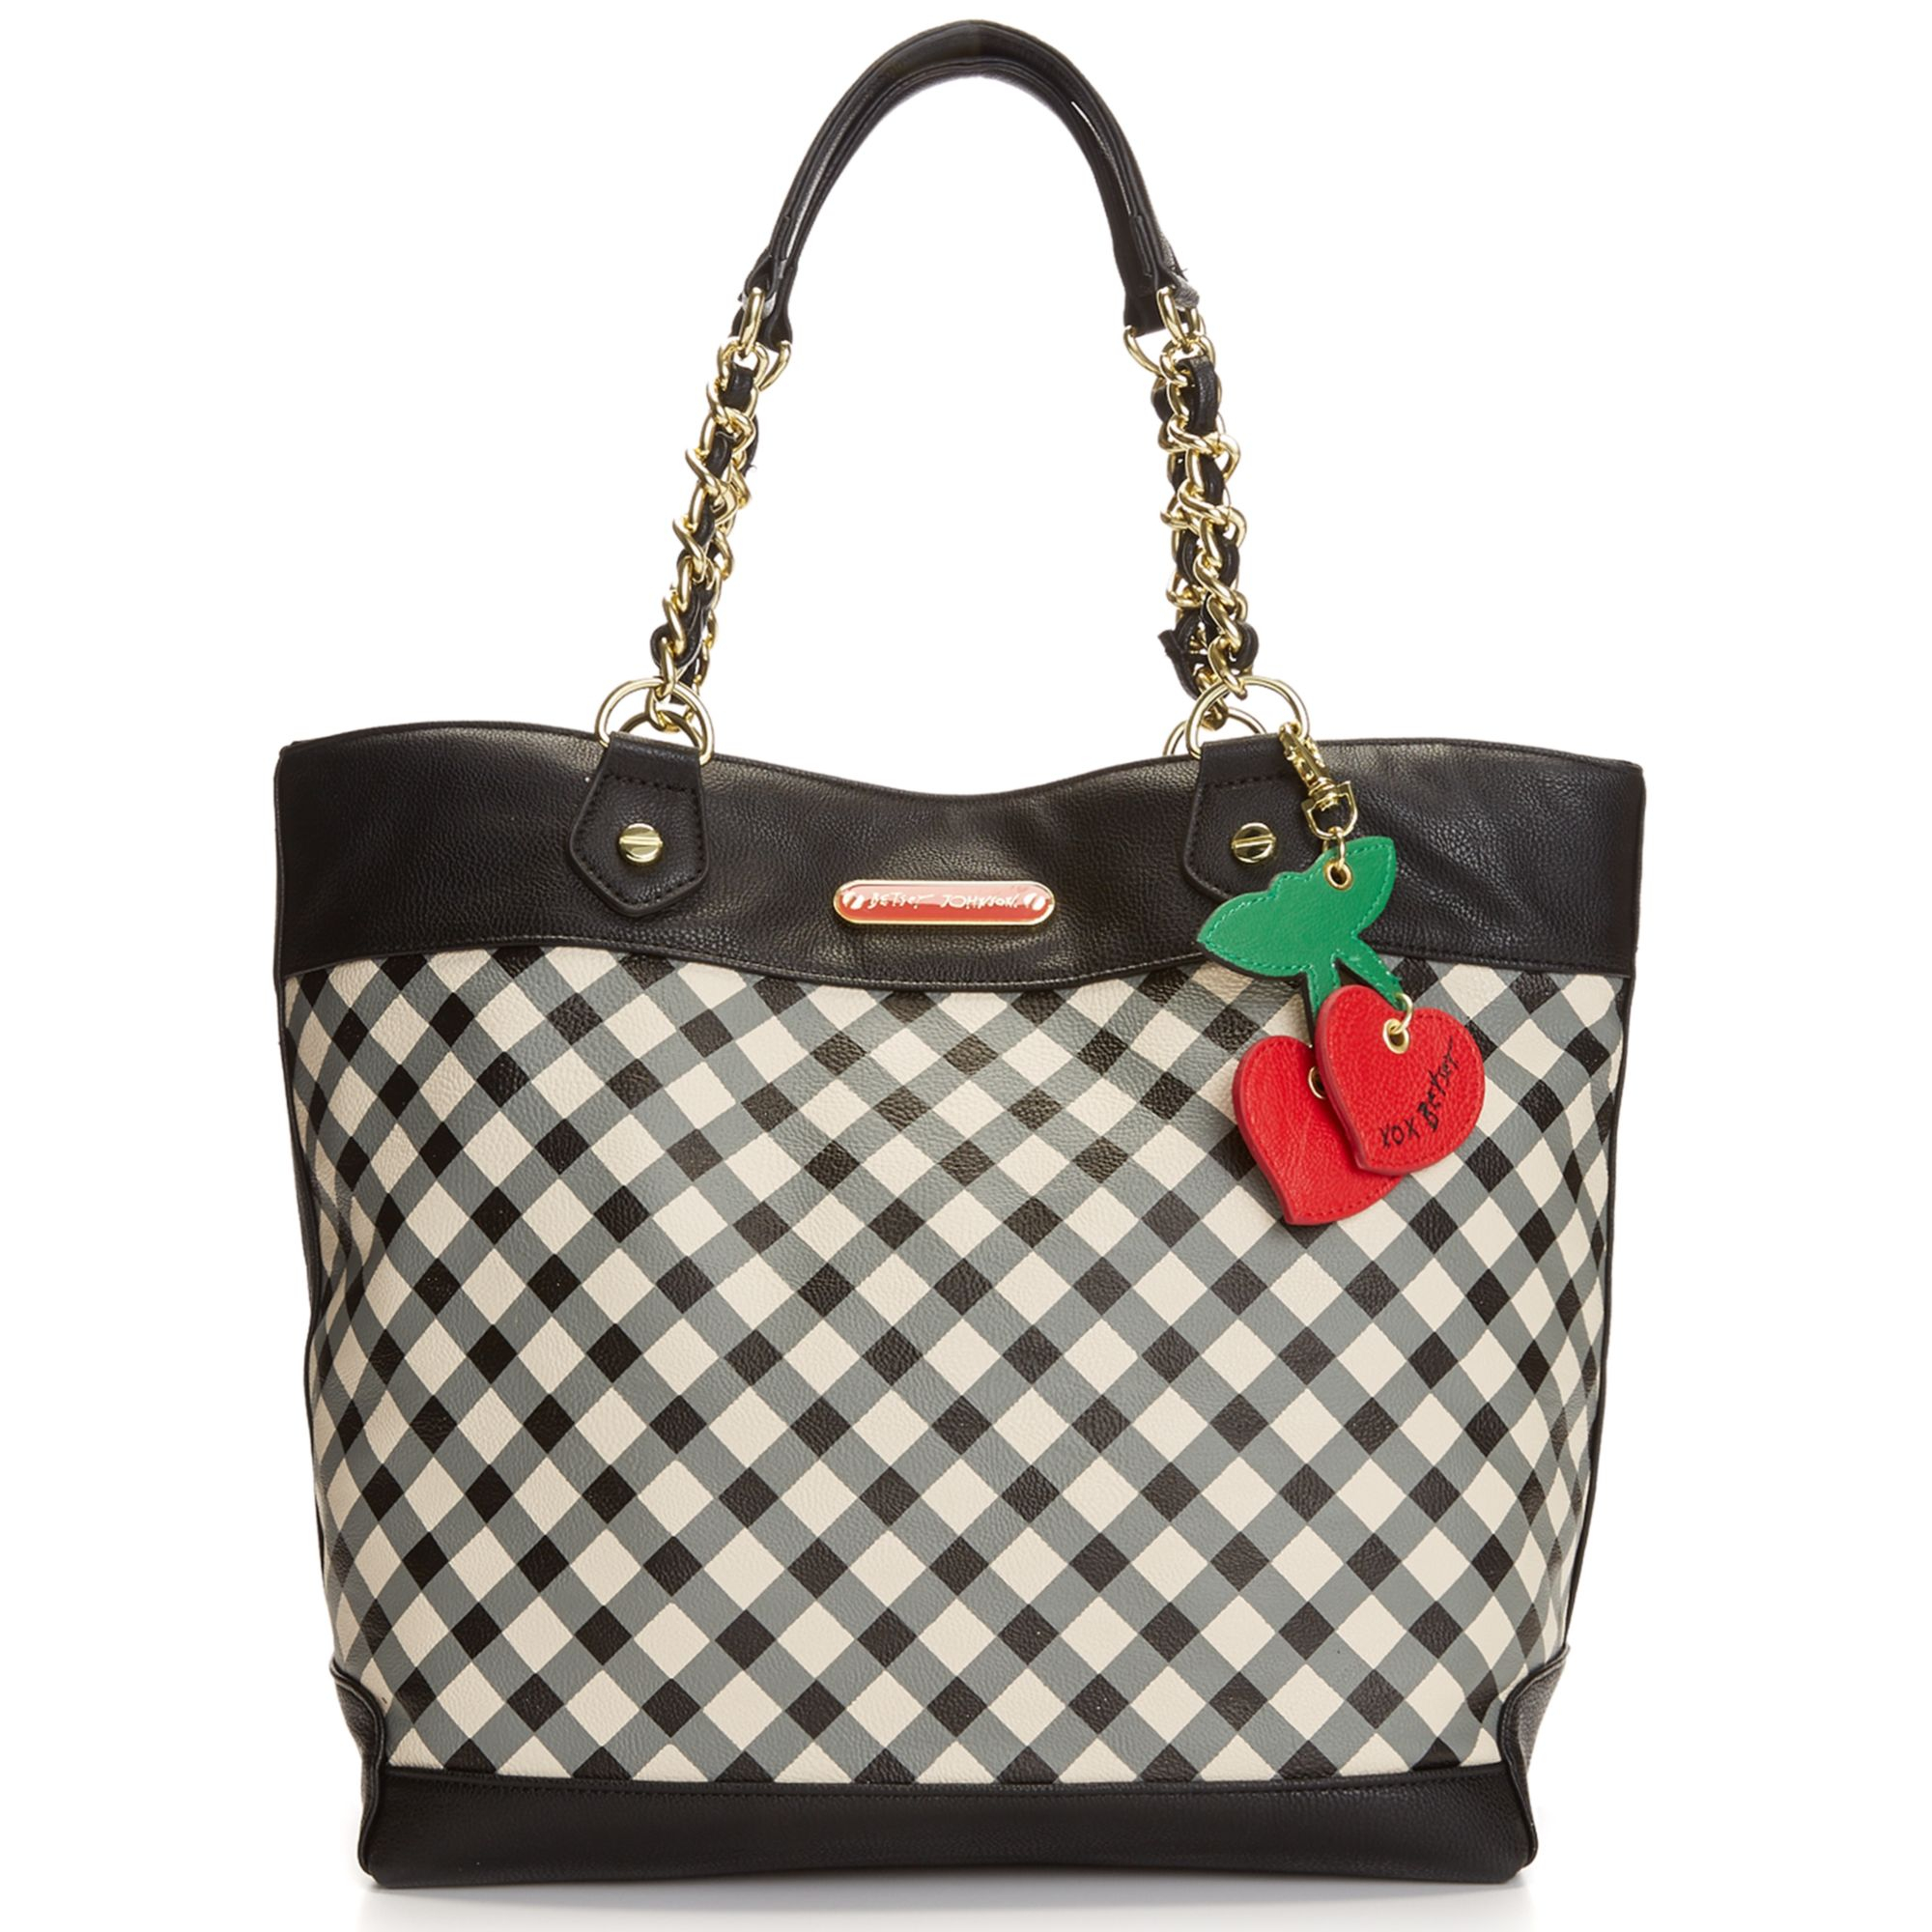 Betsey Johnson Macys Exclusive Tote in White (Black/White Gingham) | Lyst